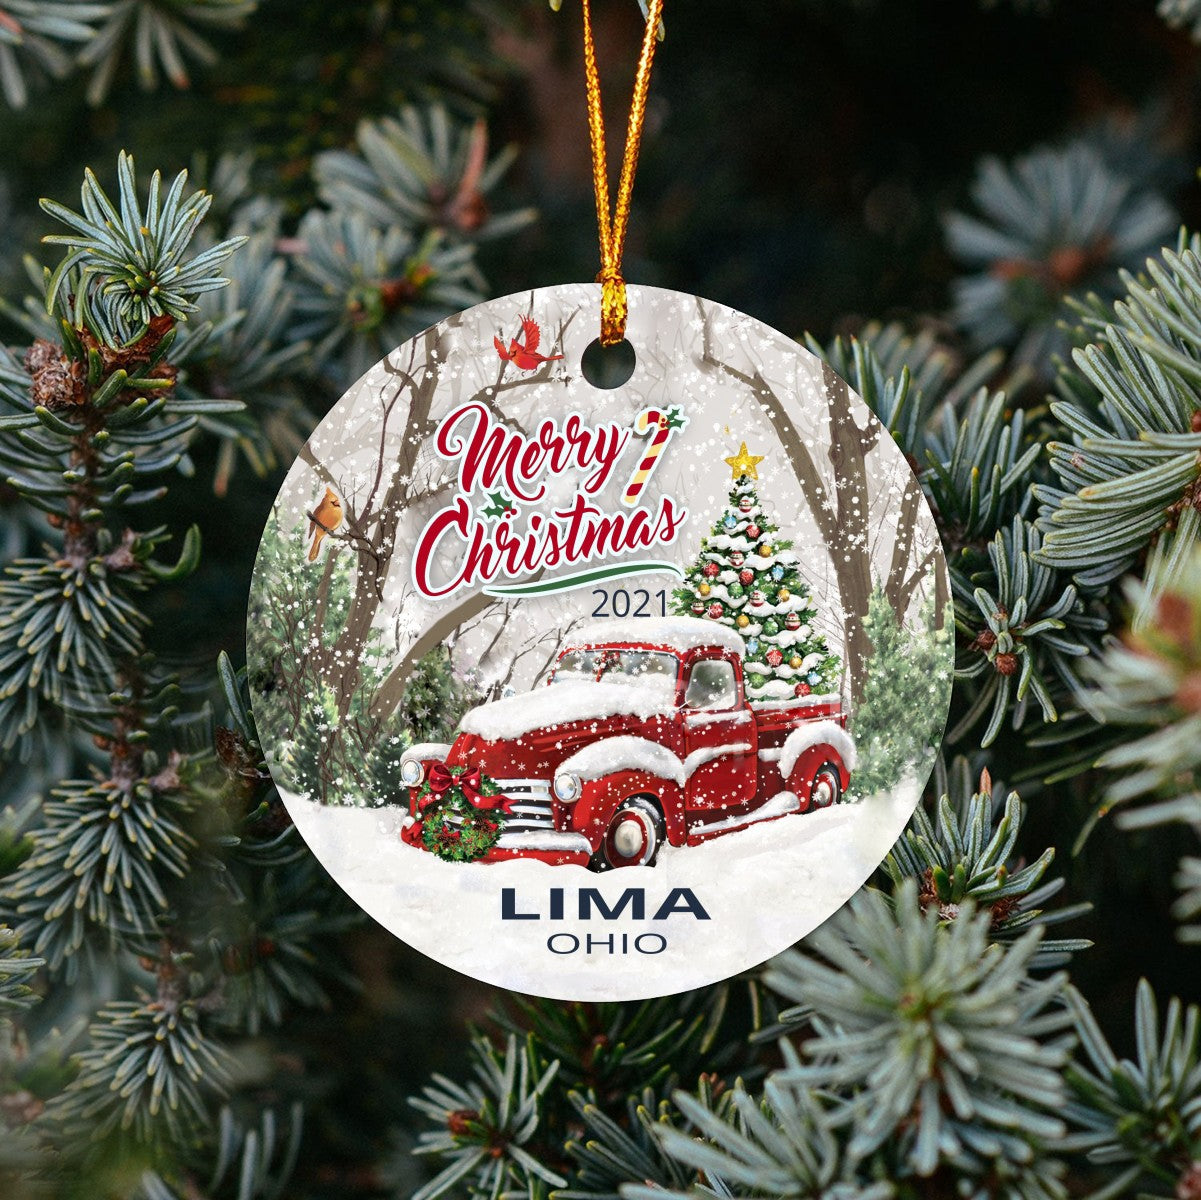 Christmas Tree Ornaments Lima - Ornament Customize With Name City And State Lima Ohio OH - Red Truck Xmas Ornaments 3'' Plastic Gift For Family, Friend And Housewarming